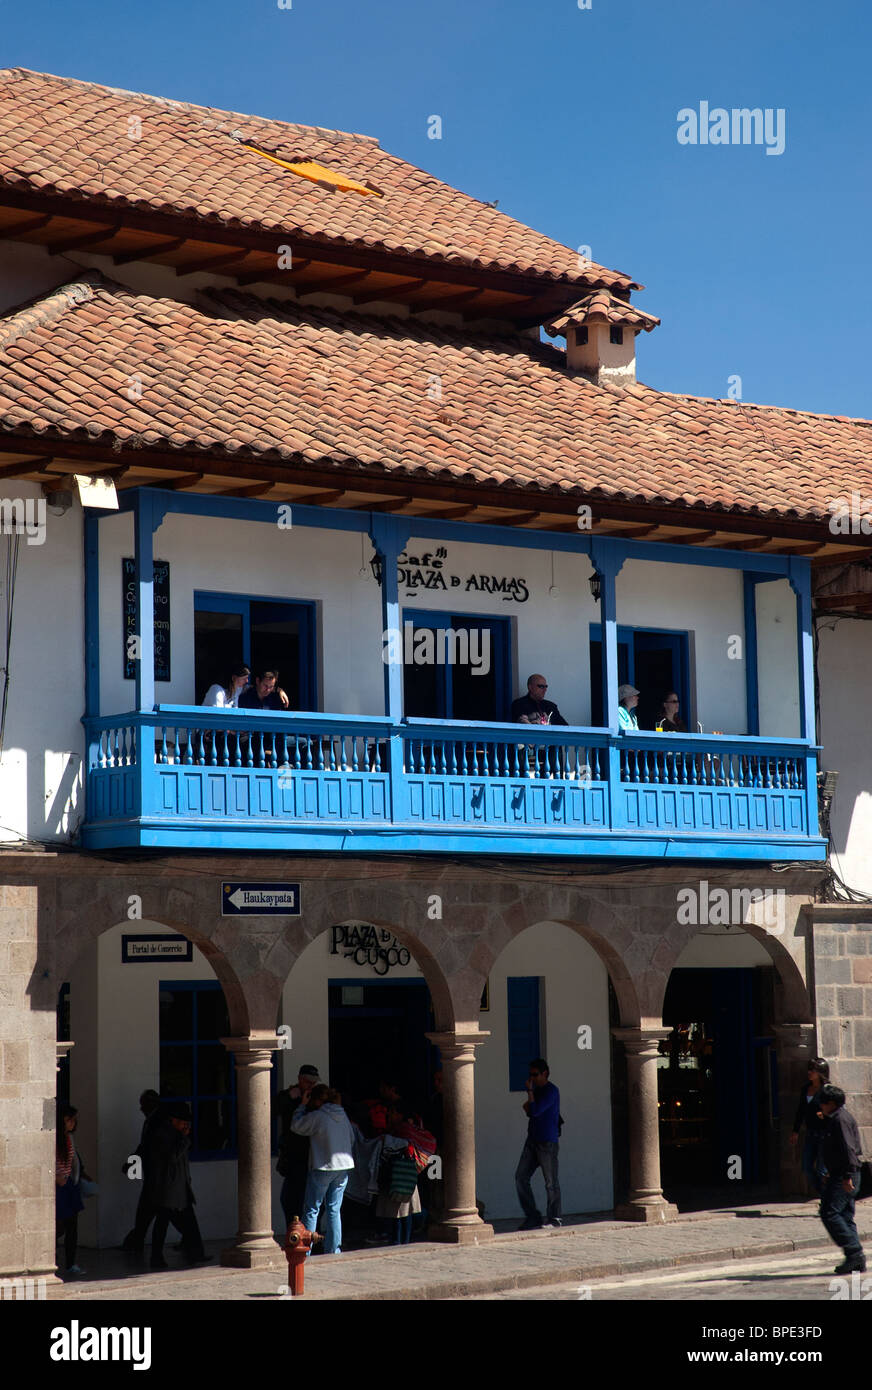 People dining and enjoy the view at a balcony restaurant in the Plaza de Armas Cusco Peru Stock Photo